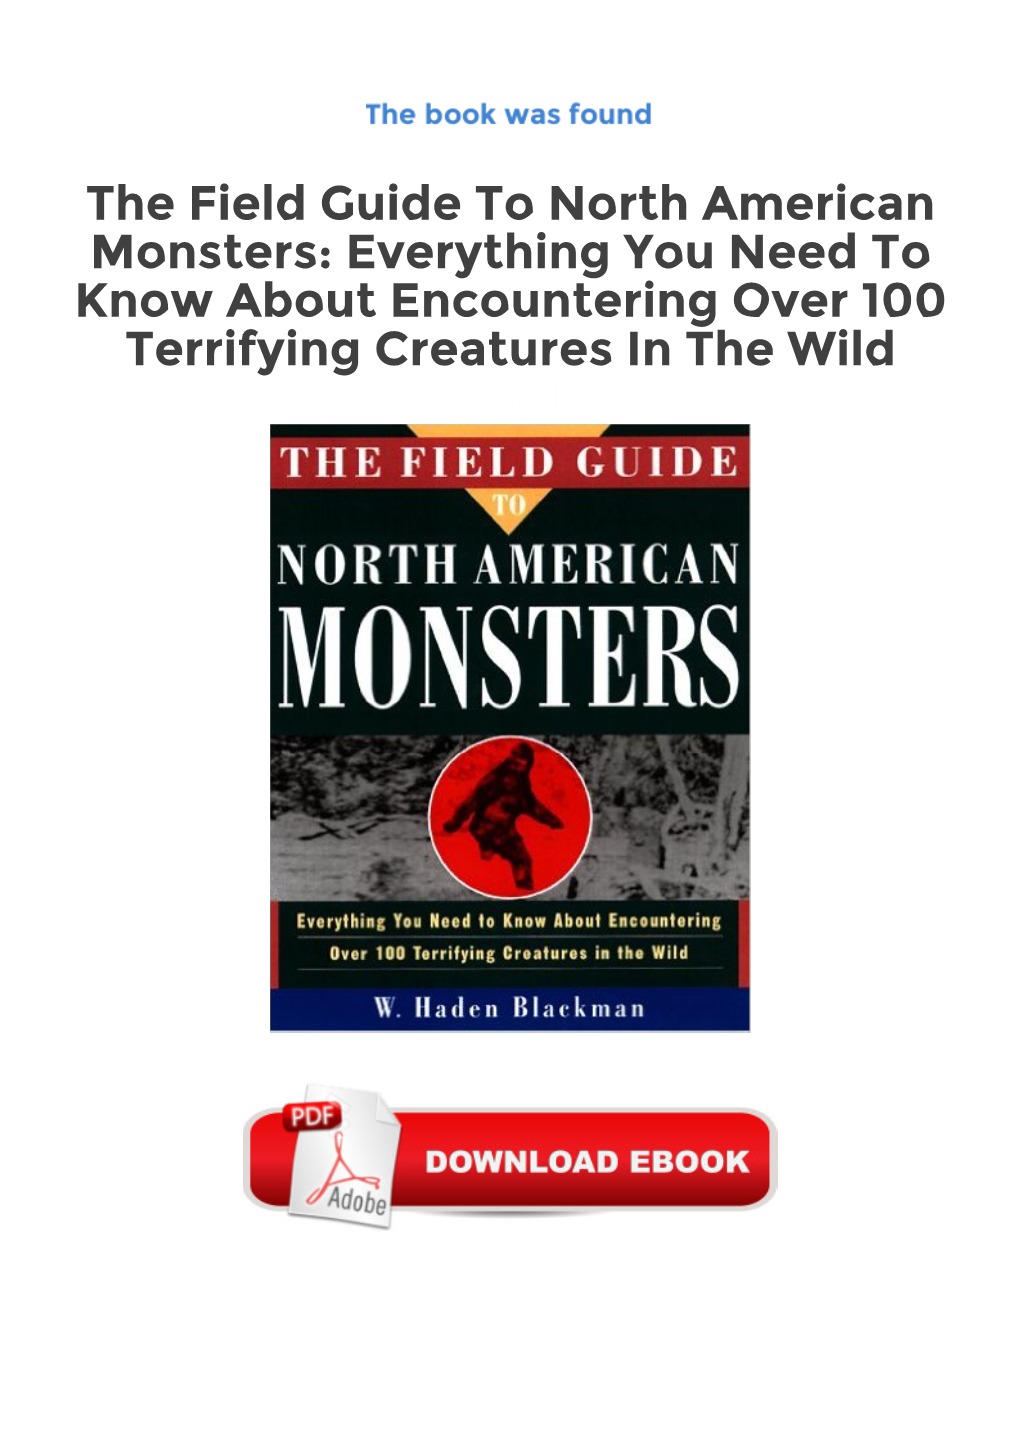 The Field Guide to North American Monsters: Everything You Need to Know About Encountering Over 100 Terrifying Creatures in the Wild Ebooks Book by W